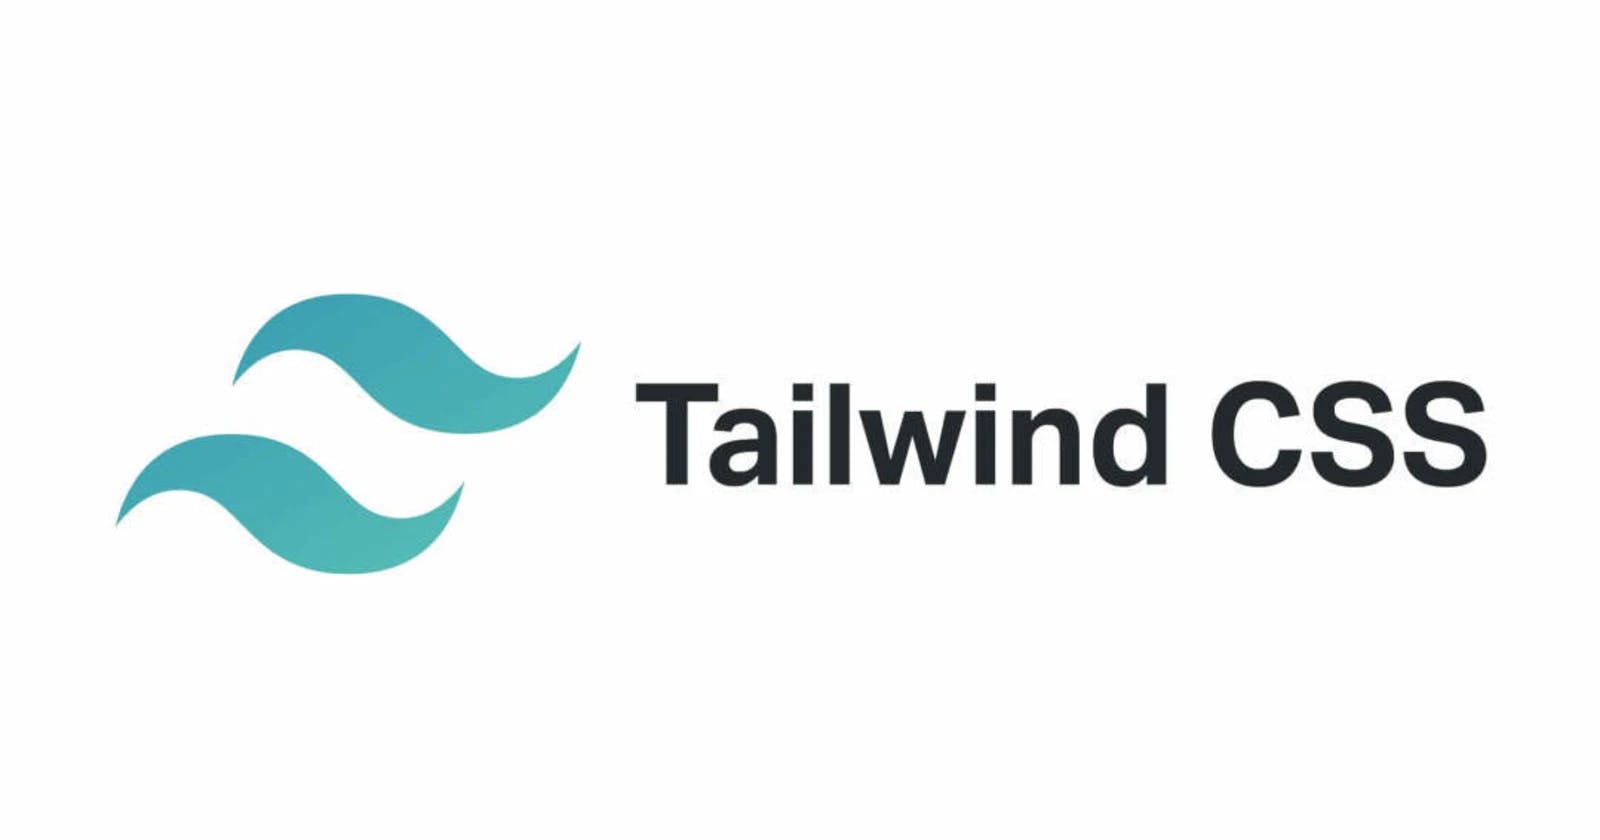 All About Tailwind CSS for beginners.